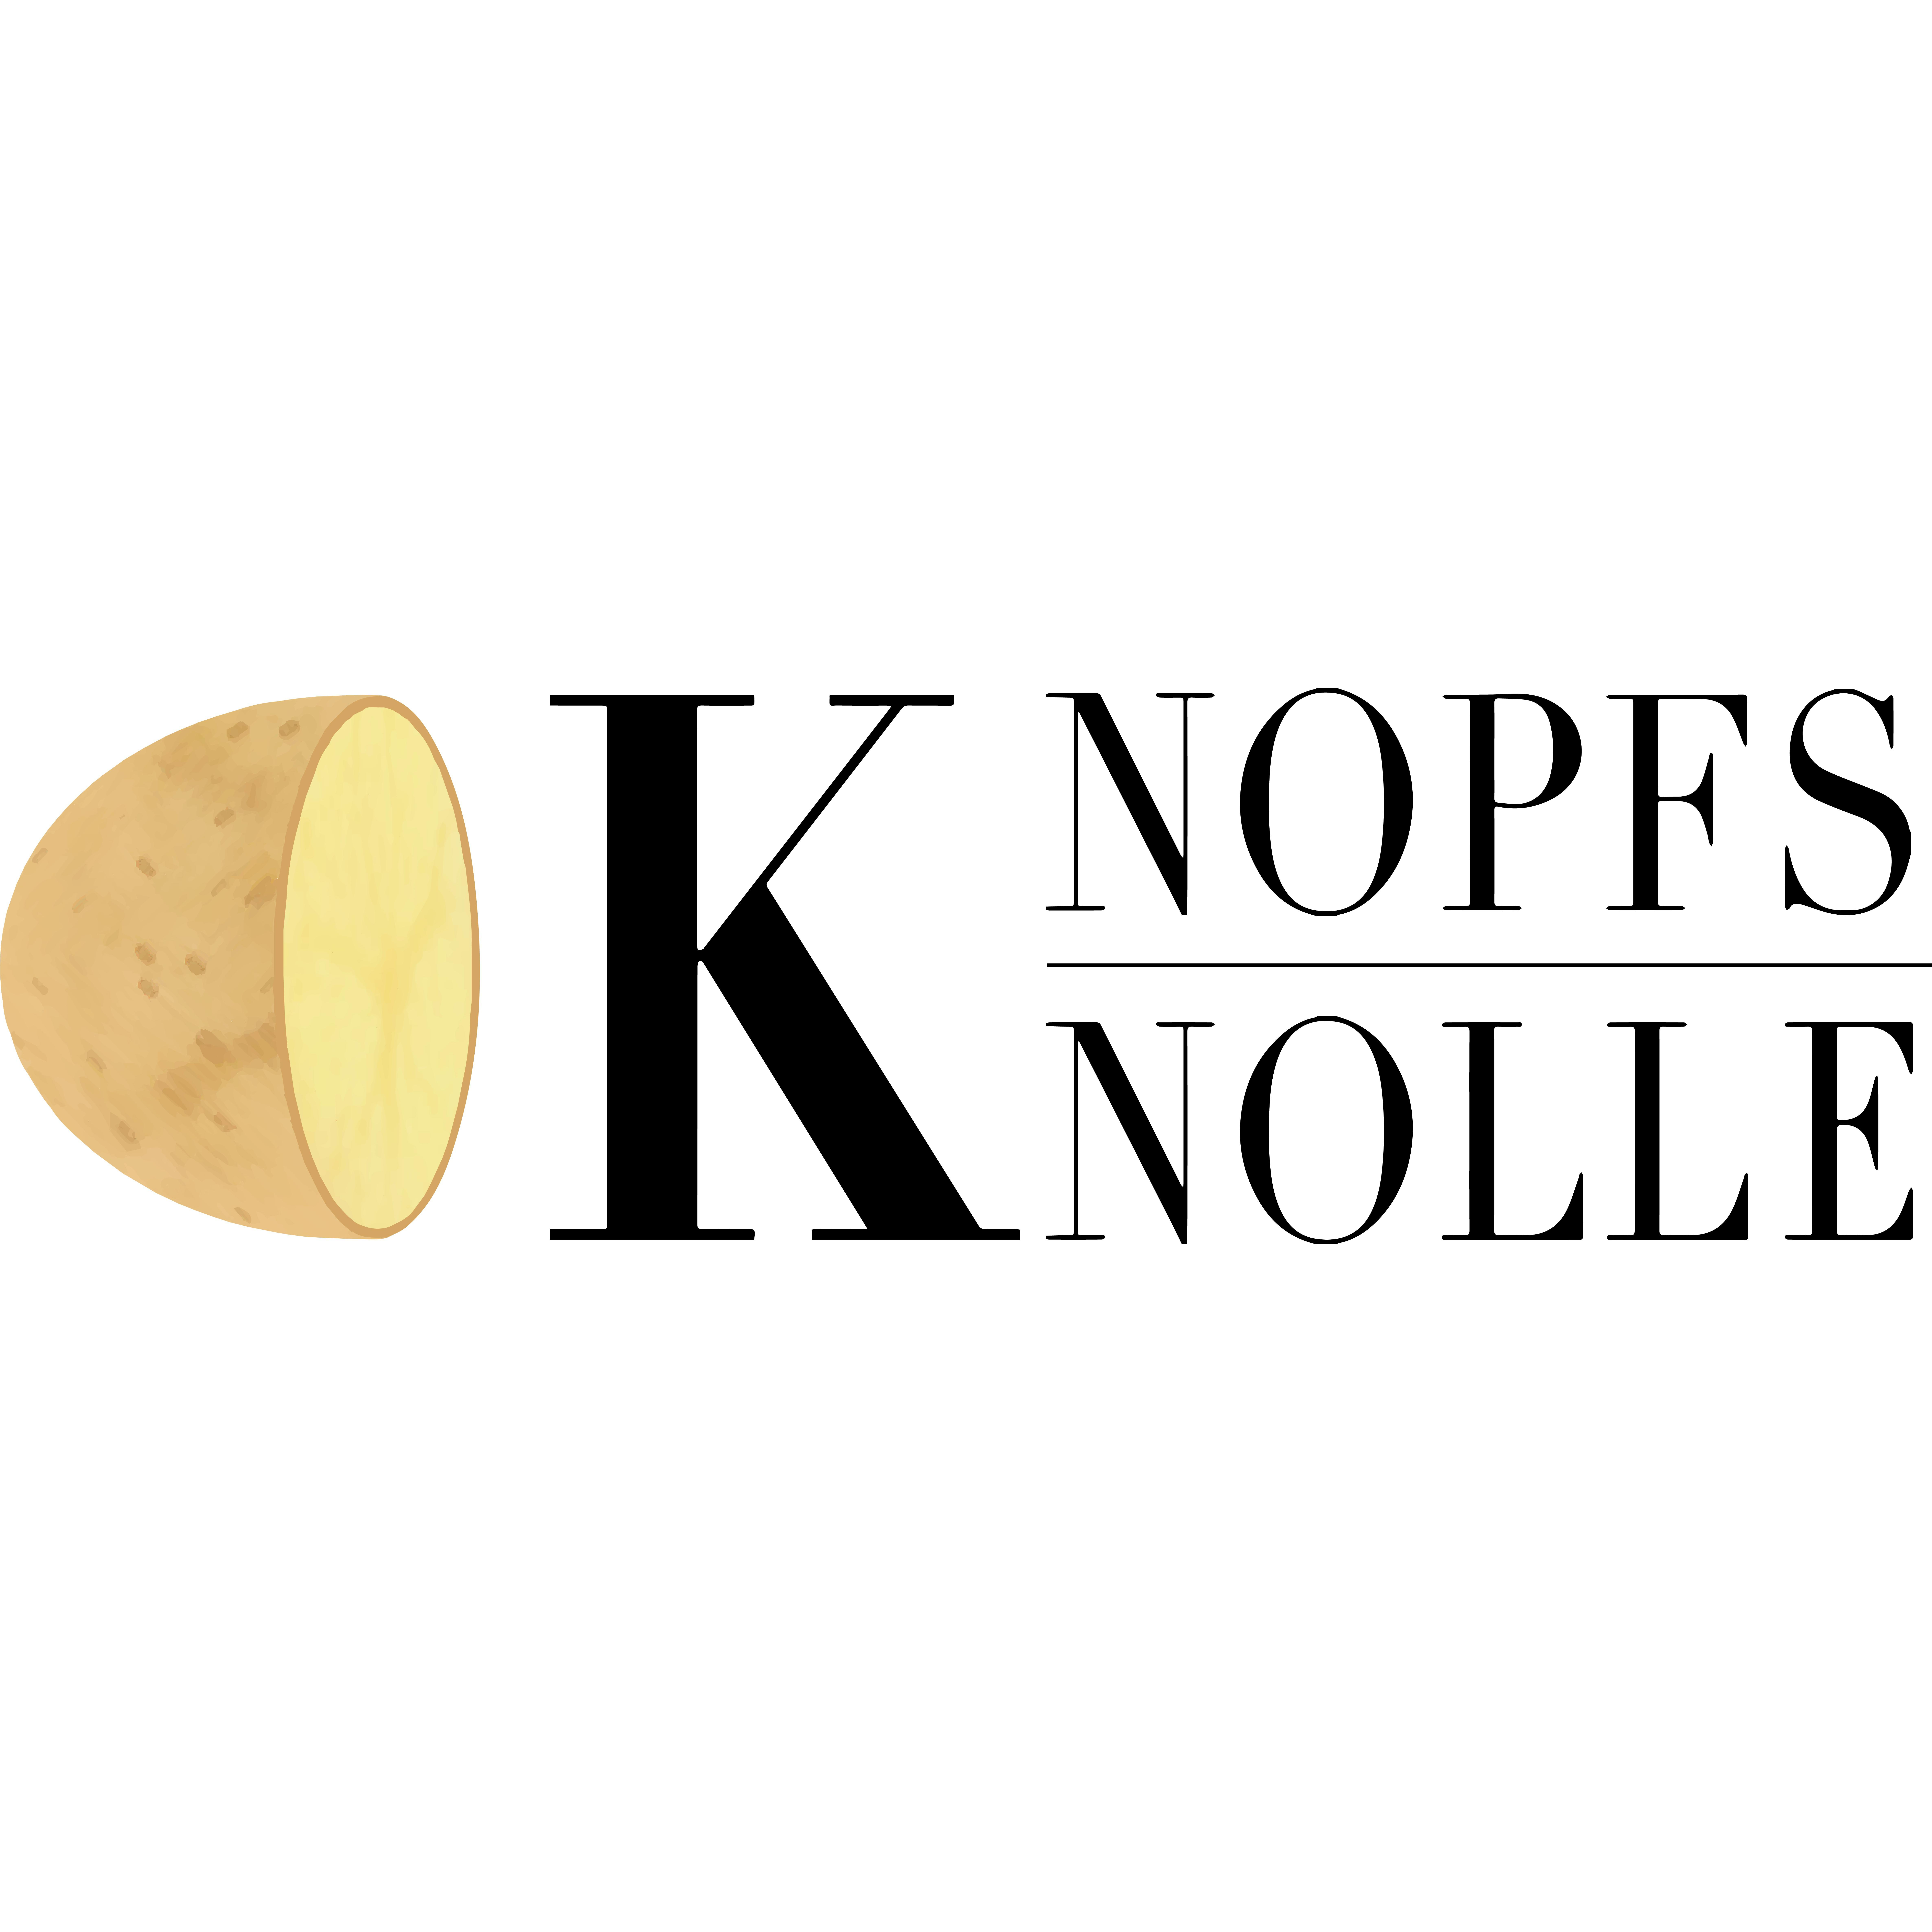 Knopfs Knolle in Münster